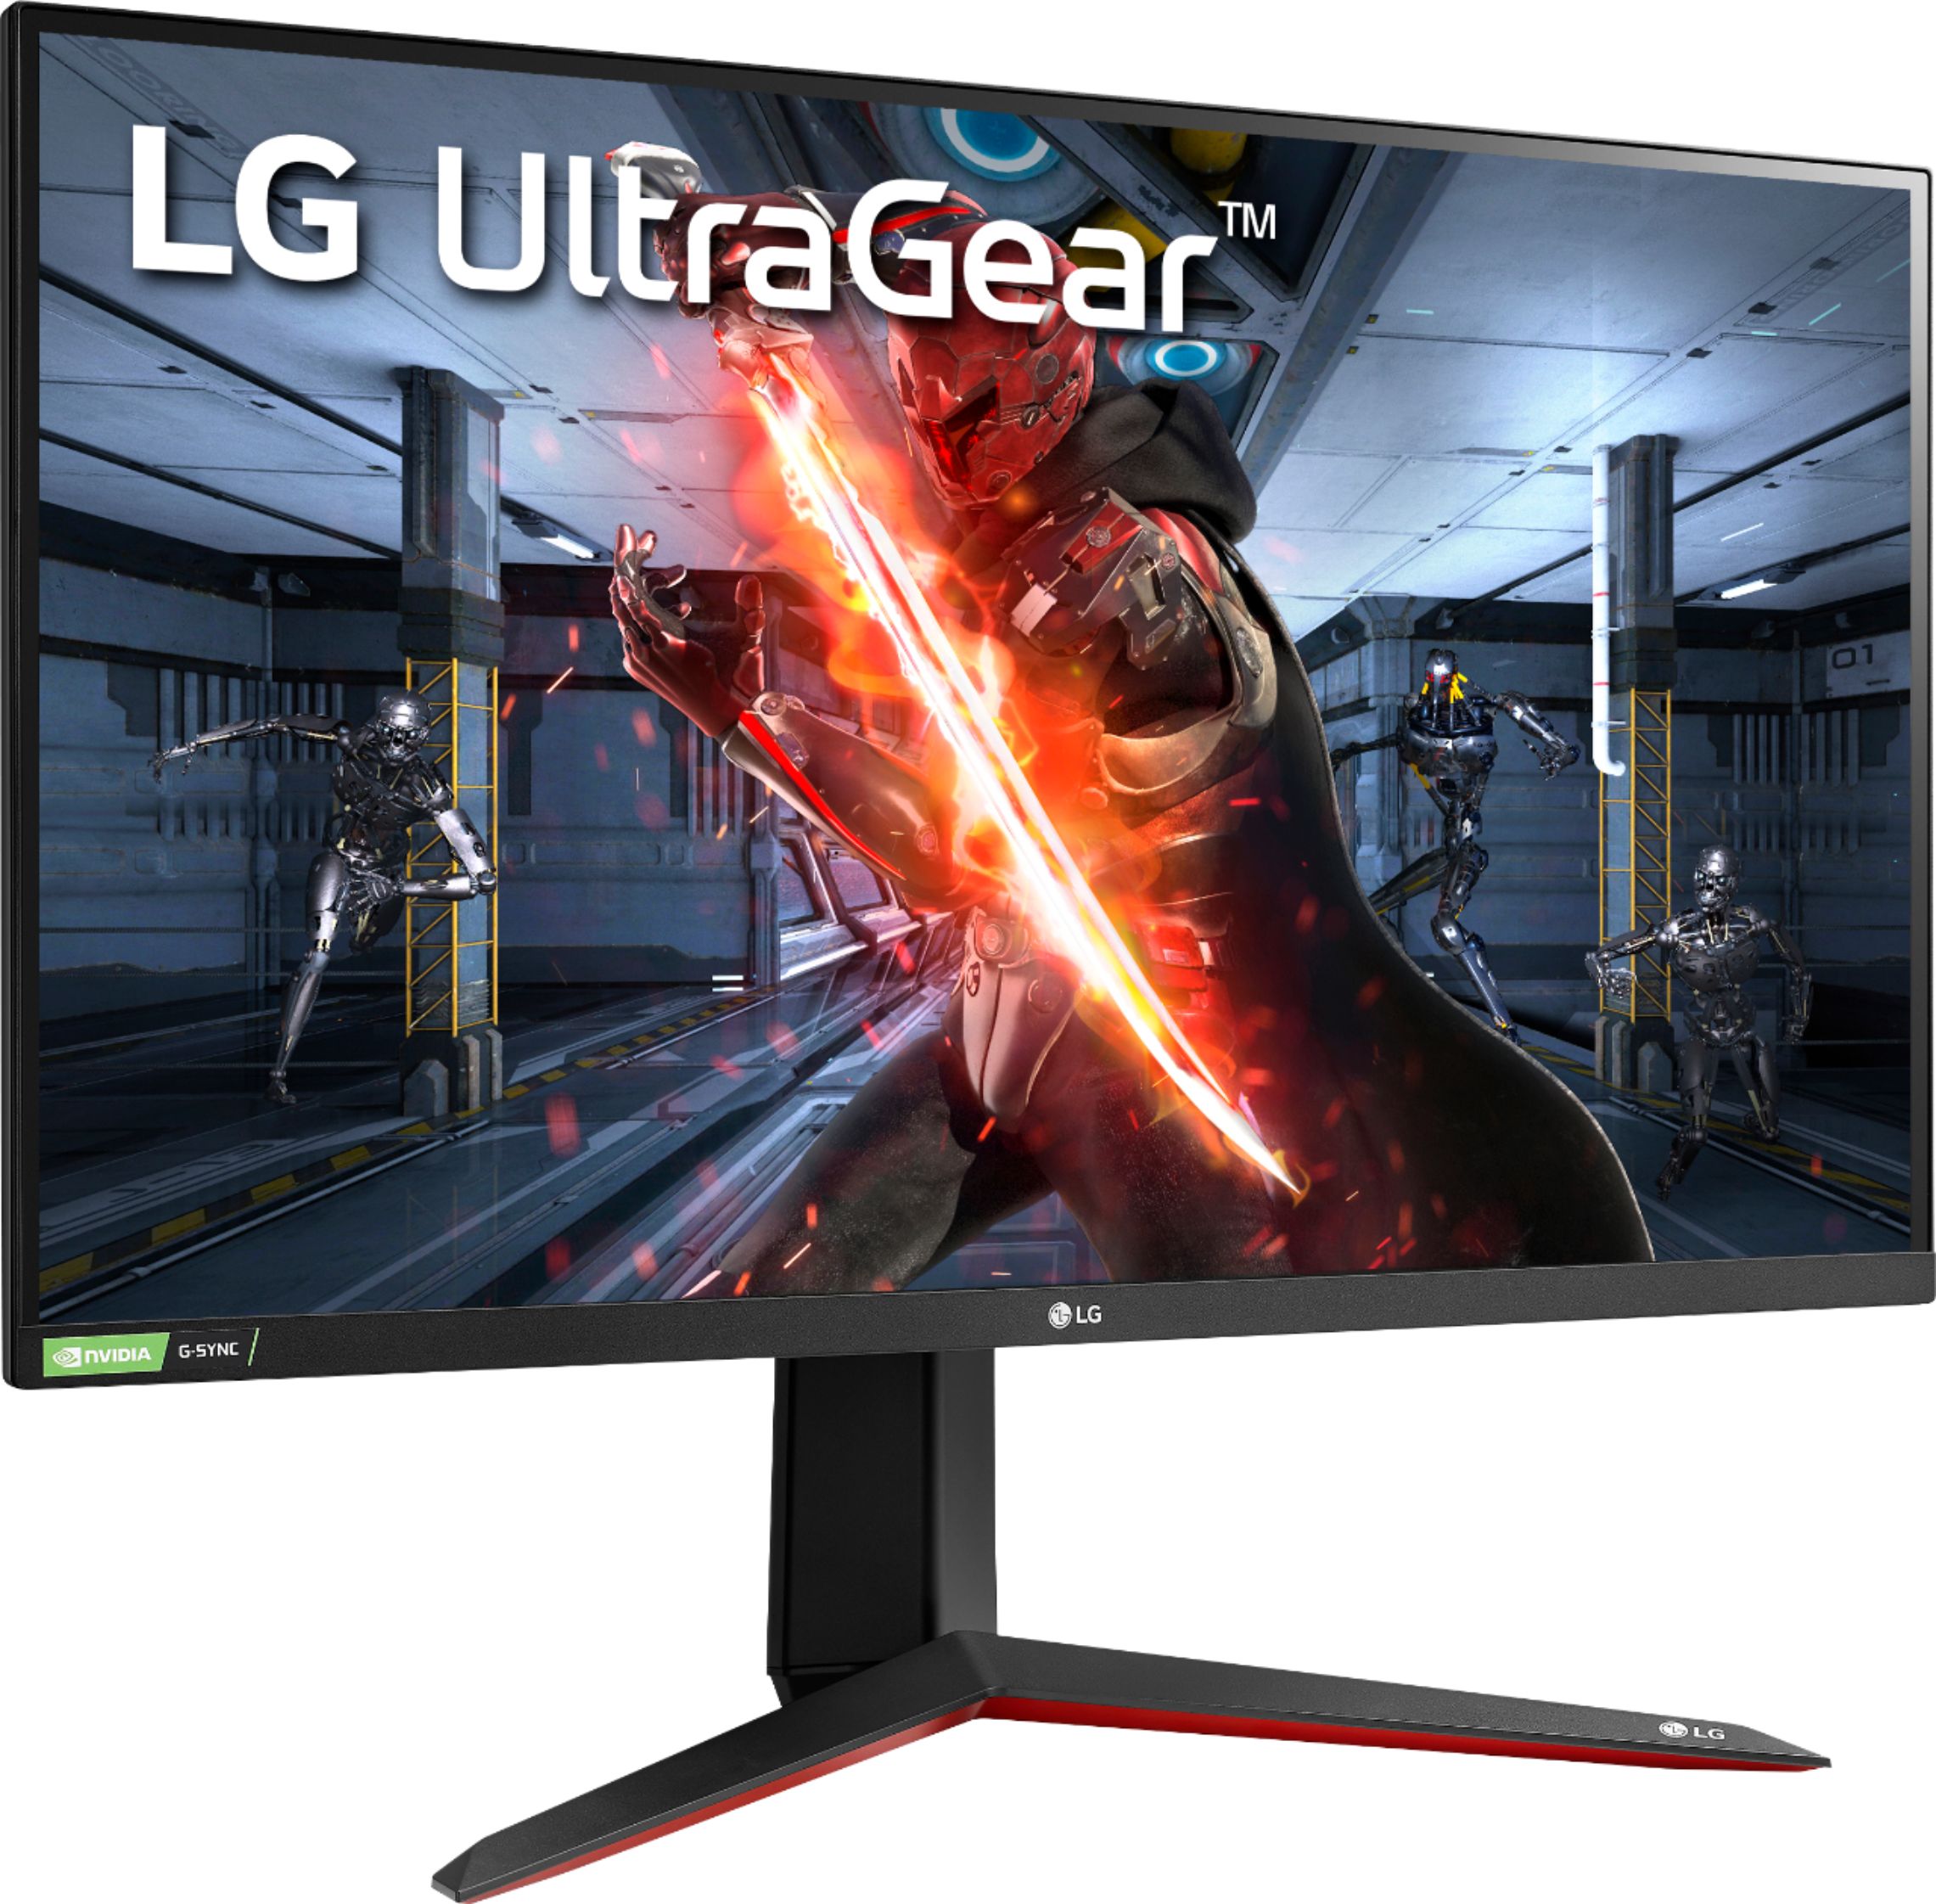 Angle View: LG - UltraGear 27" IPS LED QHD FreeSync and G-SYNC Compatible Monitor with HDR (DisplayPort, HDMI) - Black